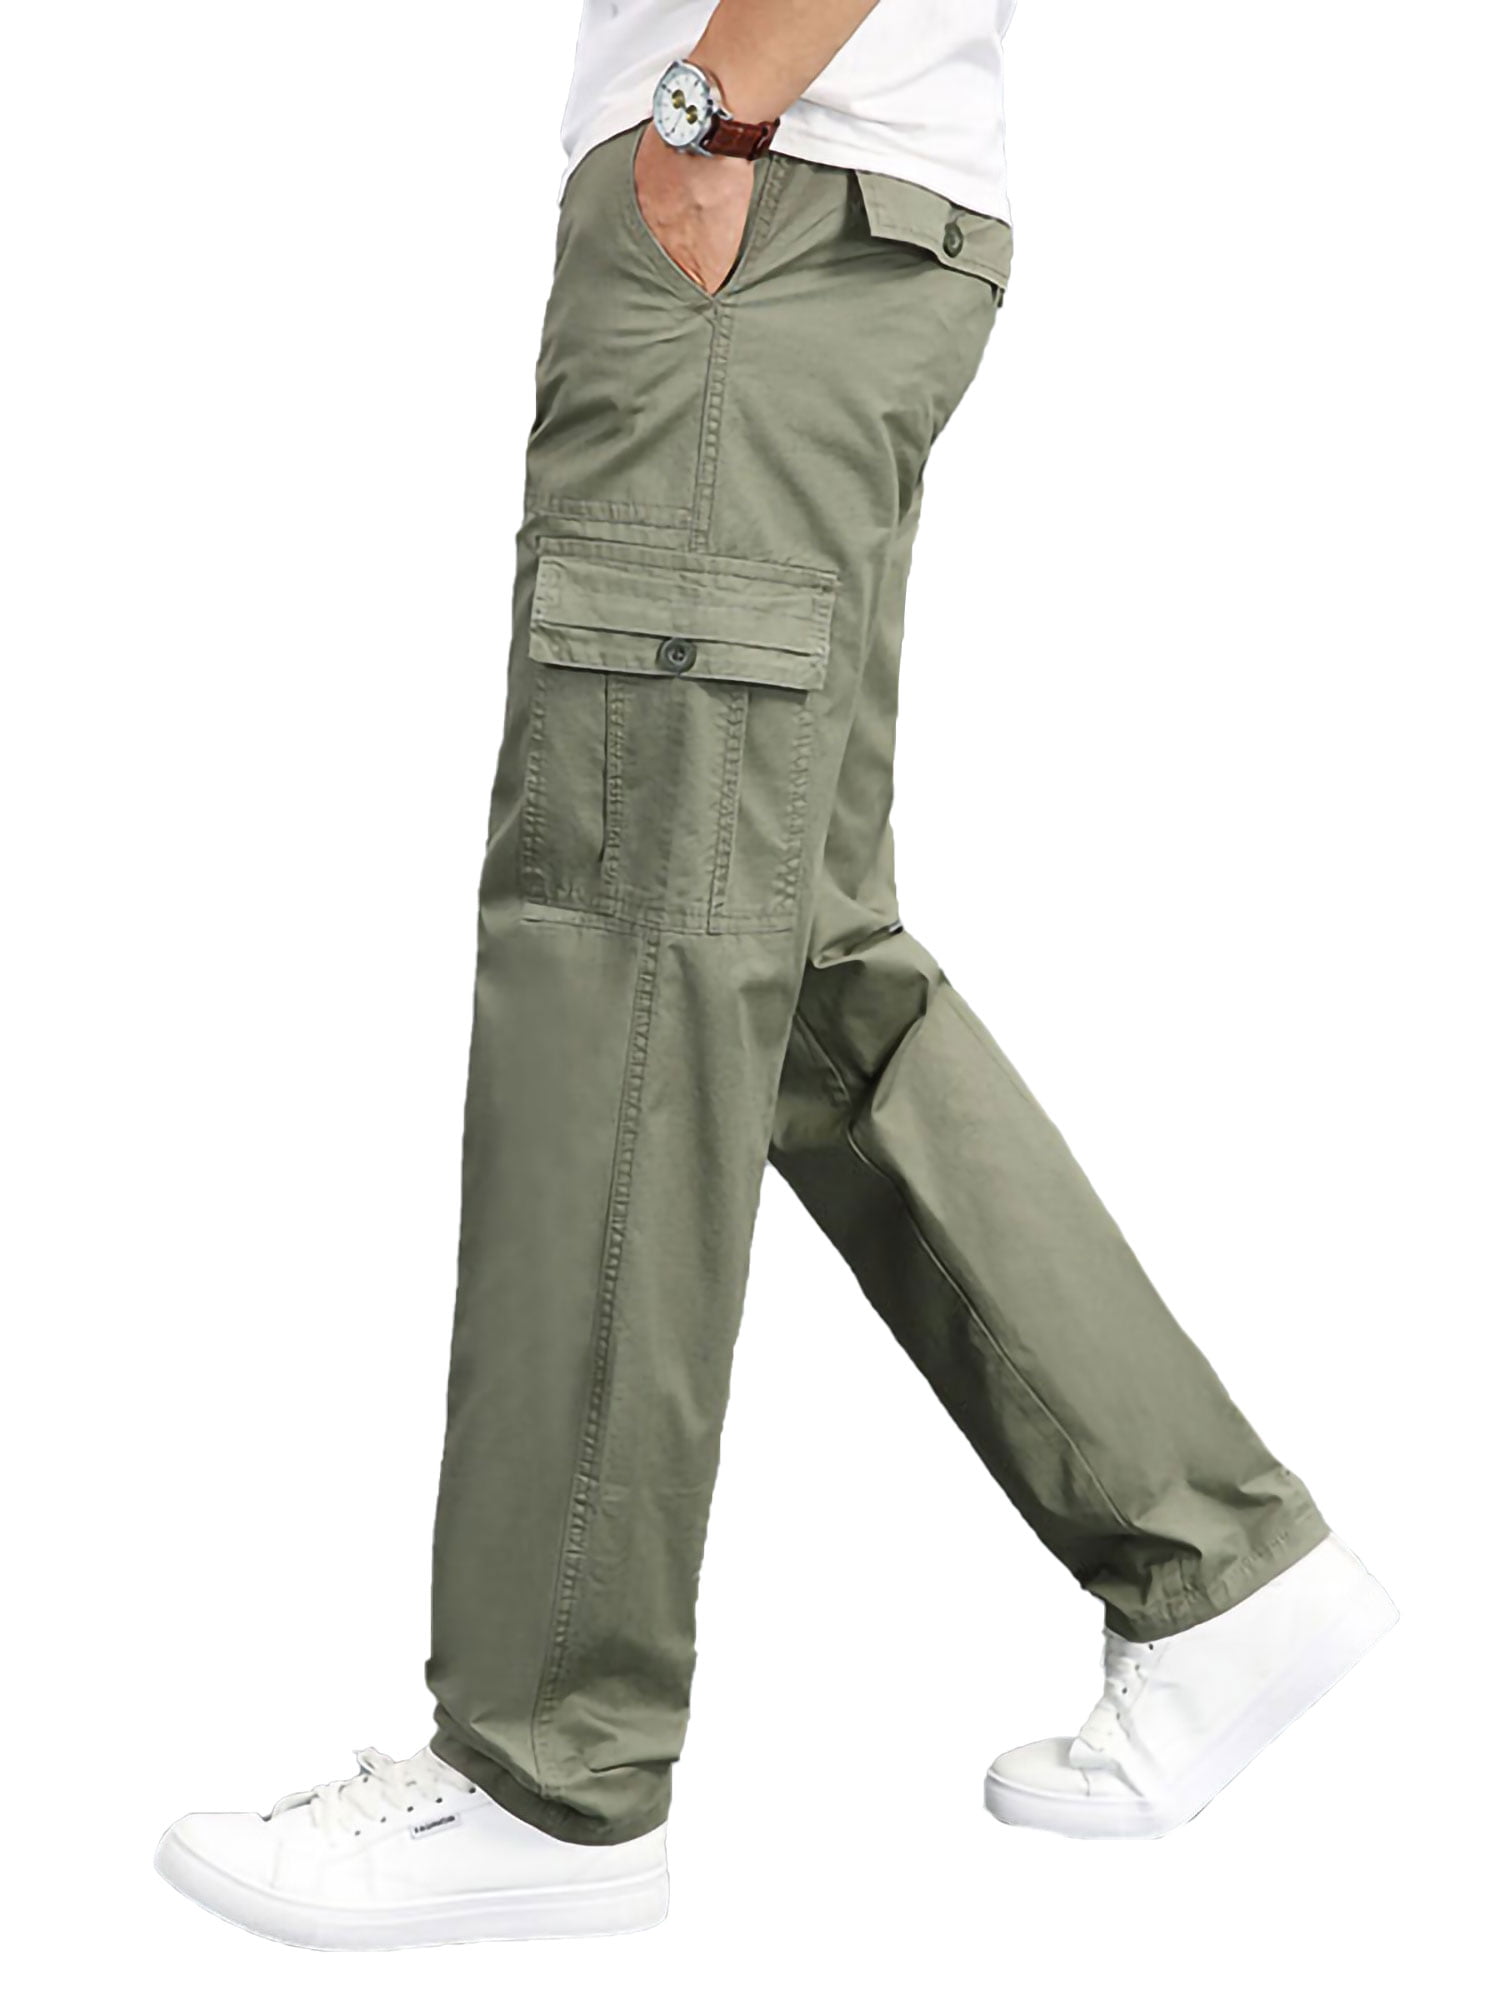 SportsX Men Summer Drawstring Active Relaxed Fit Relaxed-Fit Cargo Work Pant